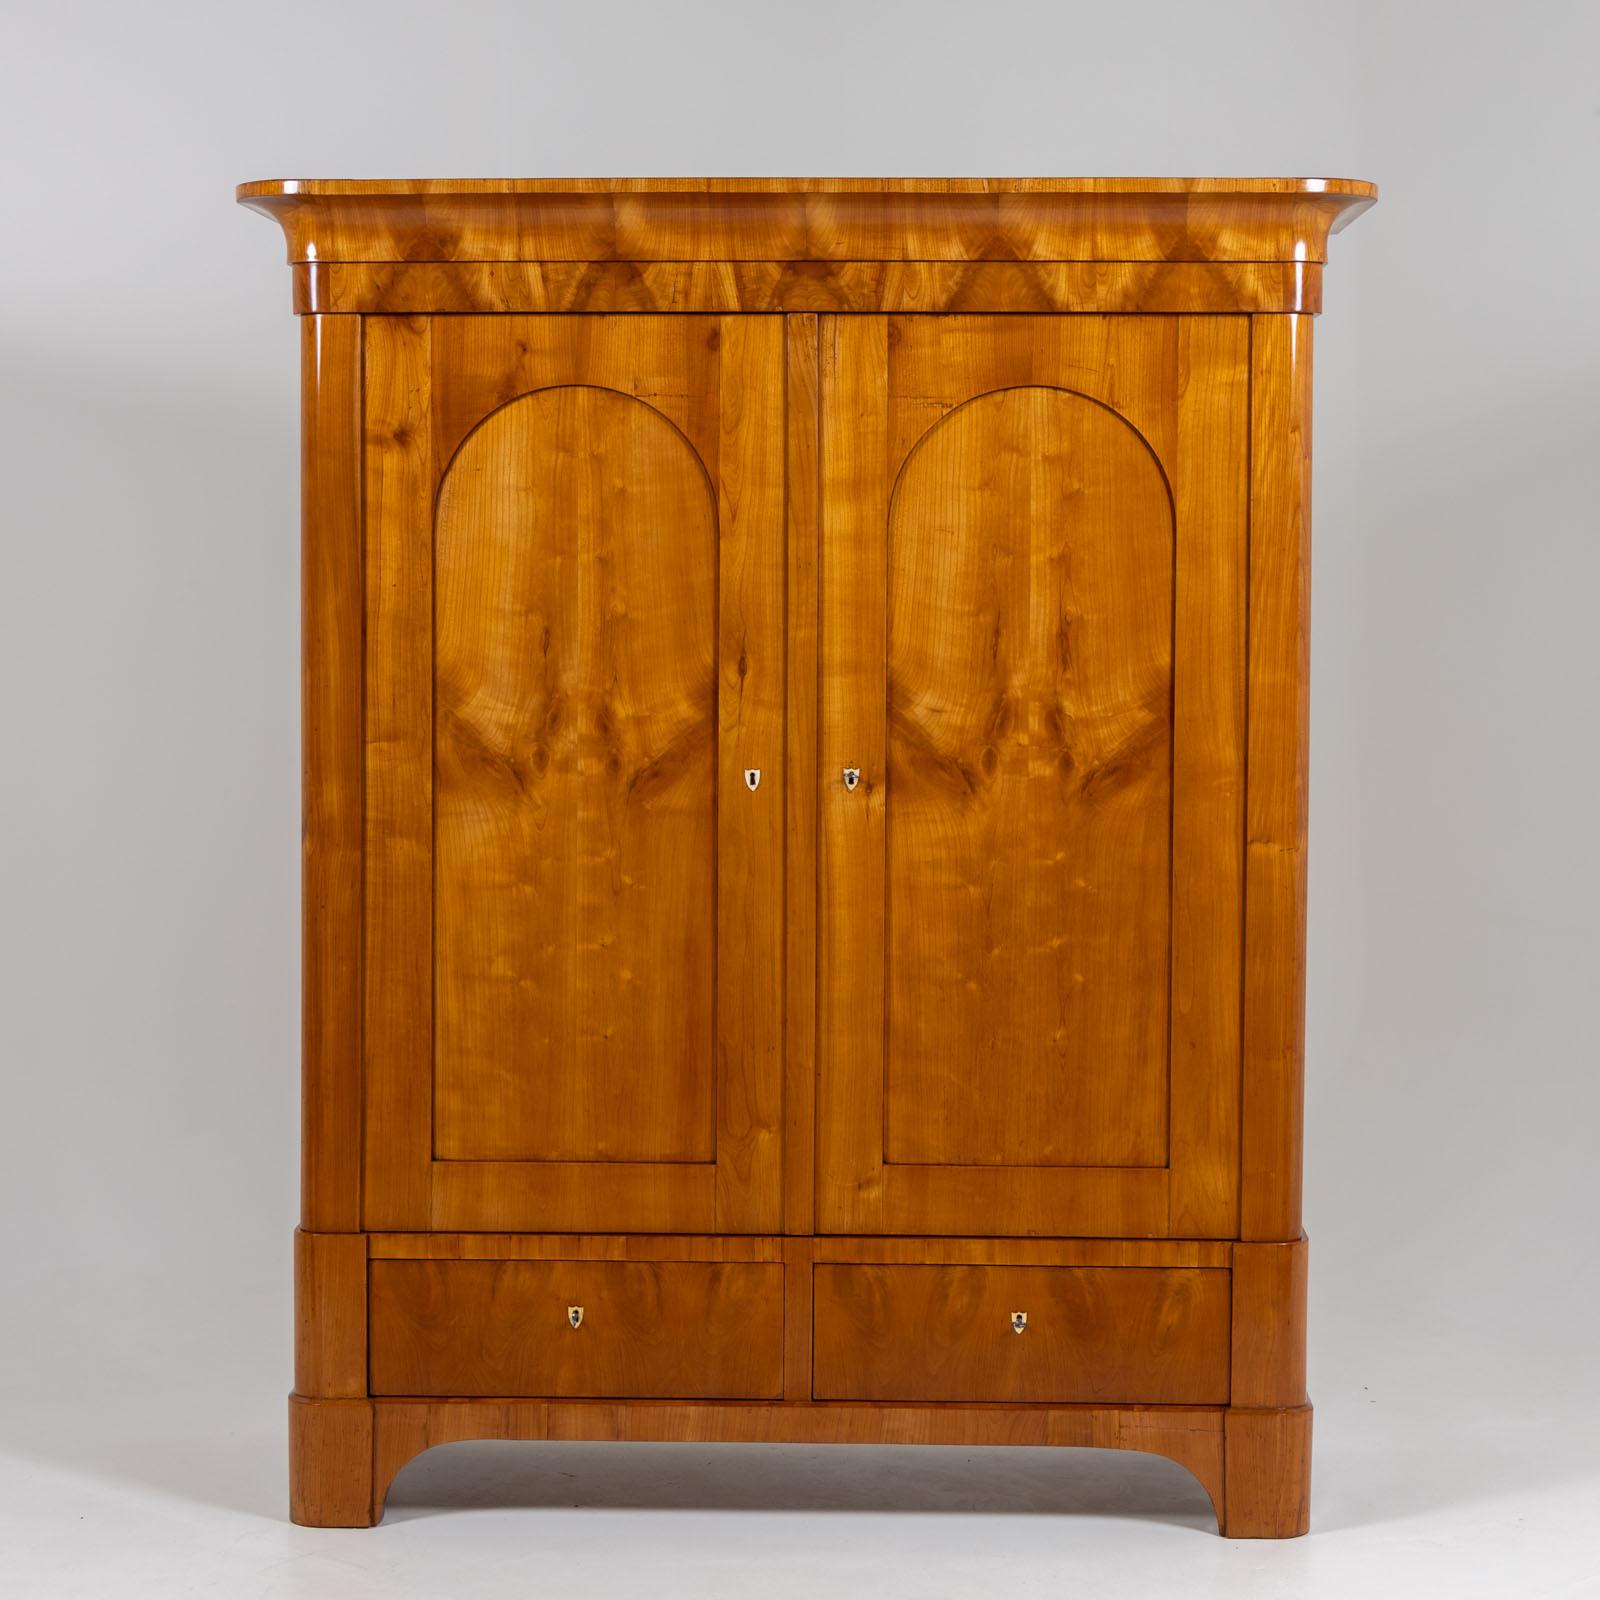 Biedermeier cabinet with two doors, two drawers and a protruding cornice. The wardrobe is veneered in cherry and has been polished by hand. The doors have panels with segmental arches. The interior is fitted with three shelves.